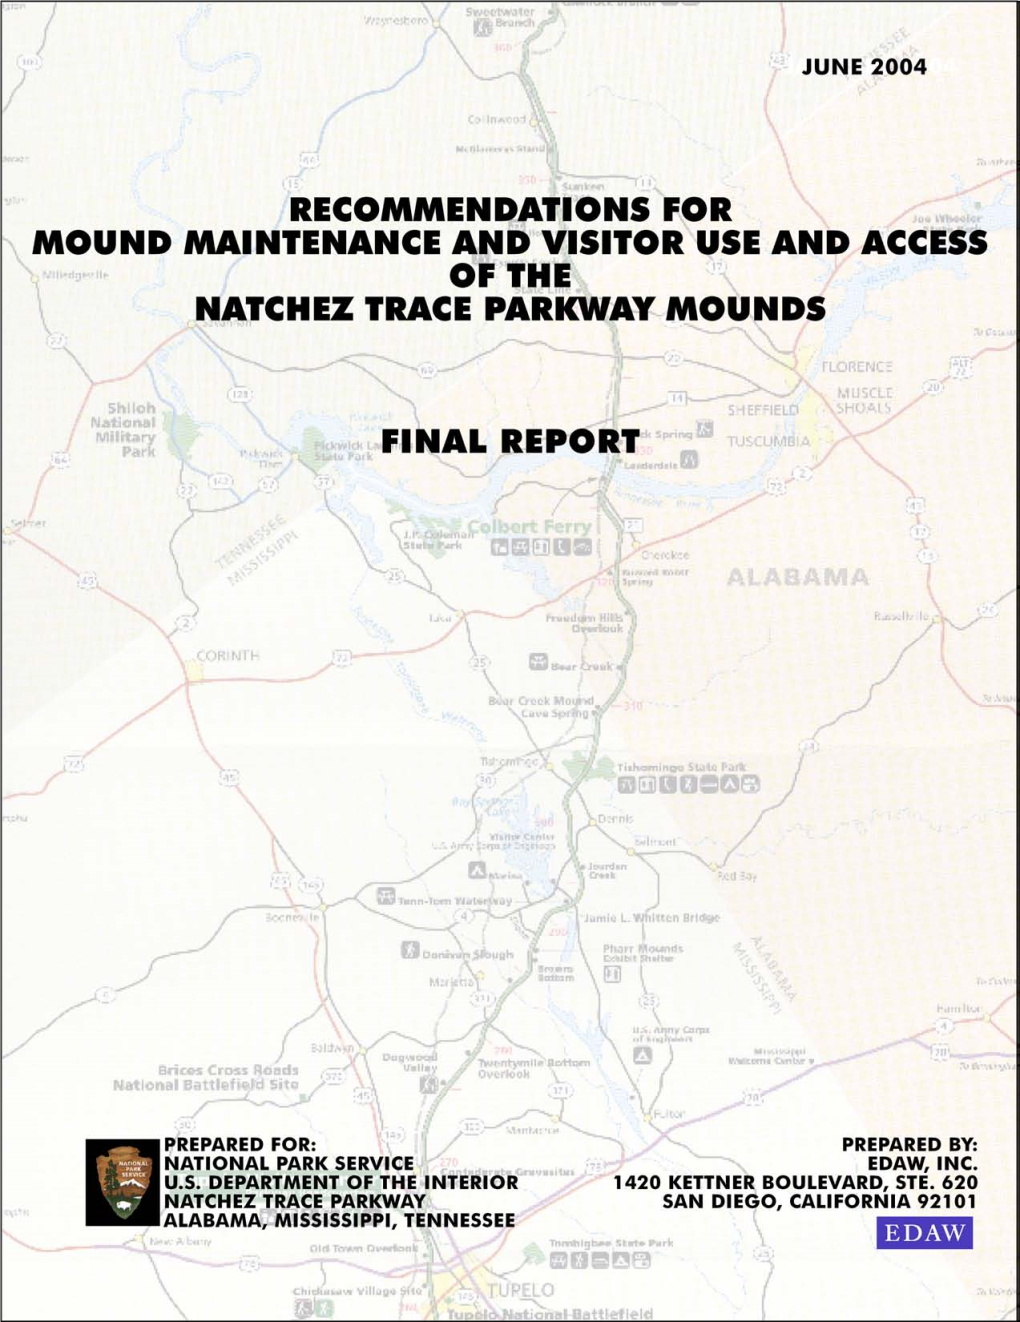 Recommendations for Mound Maintenance and Visitor Use and Access of the Natchez Trace Parkway Mounds Final Report